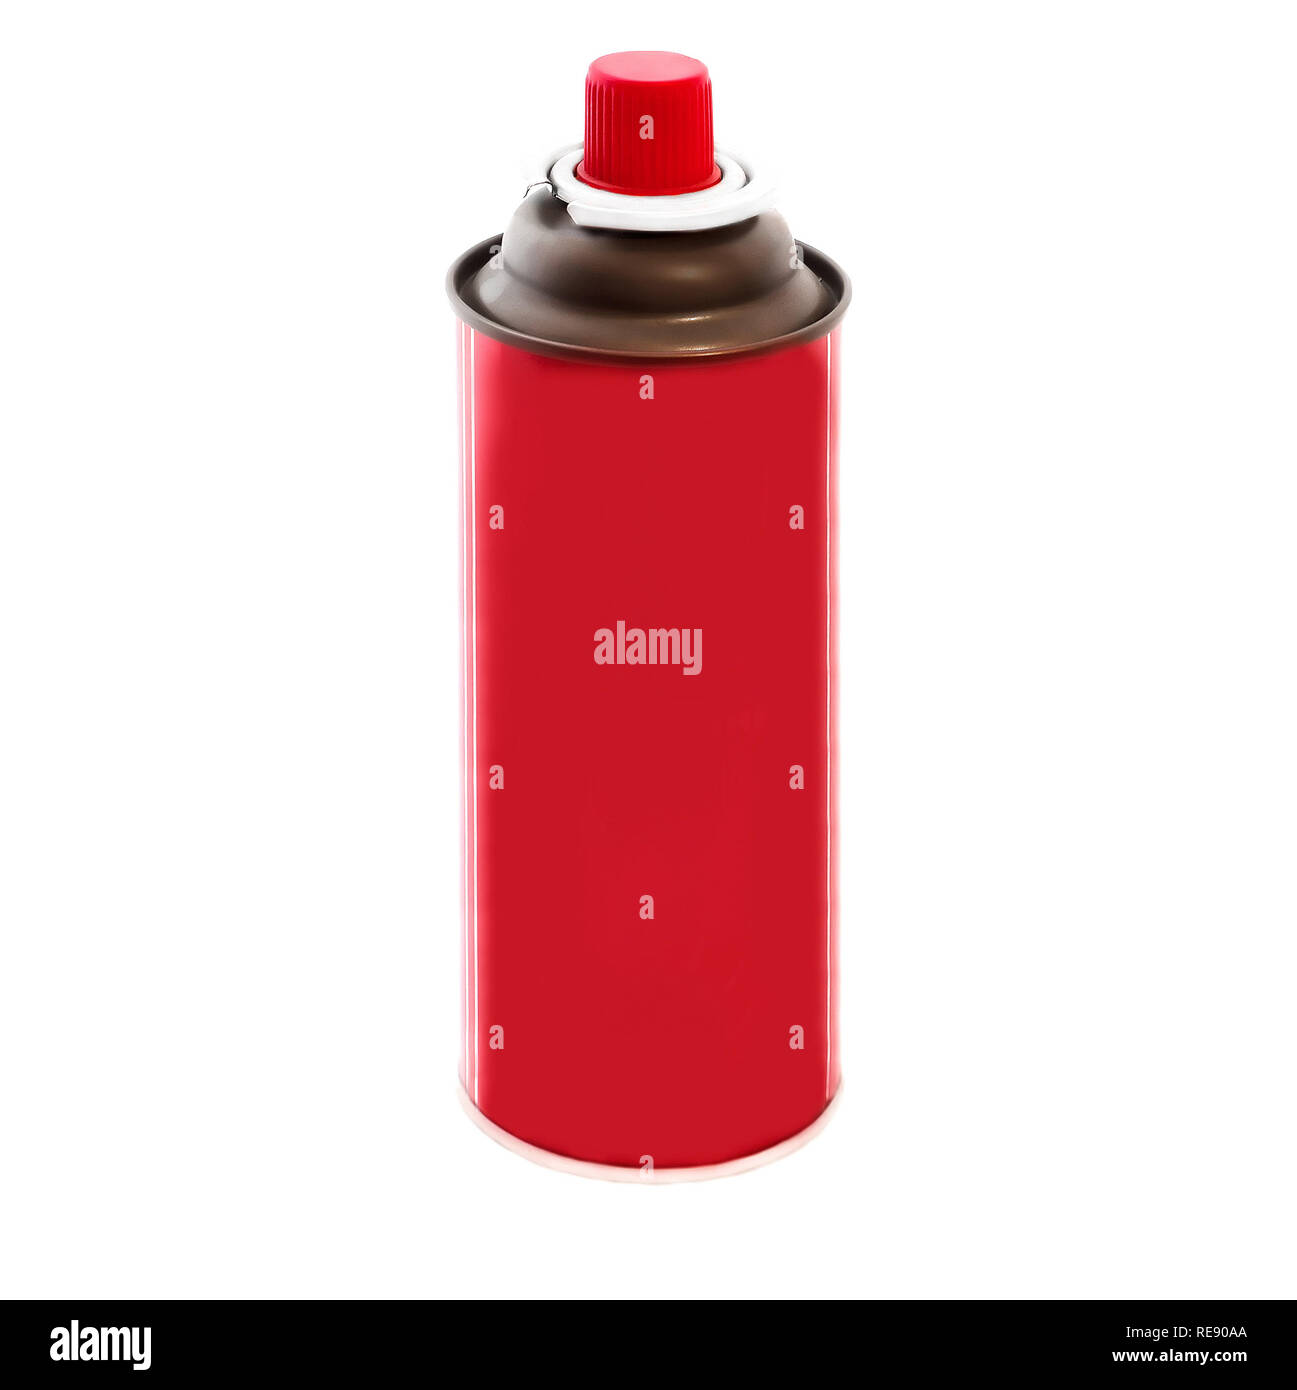 Red color spray can isolated on white background Stock Photo